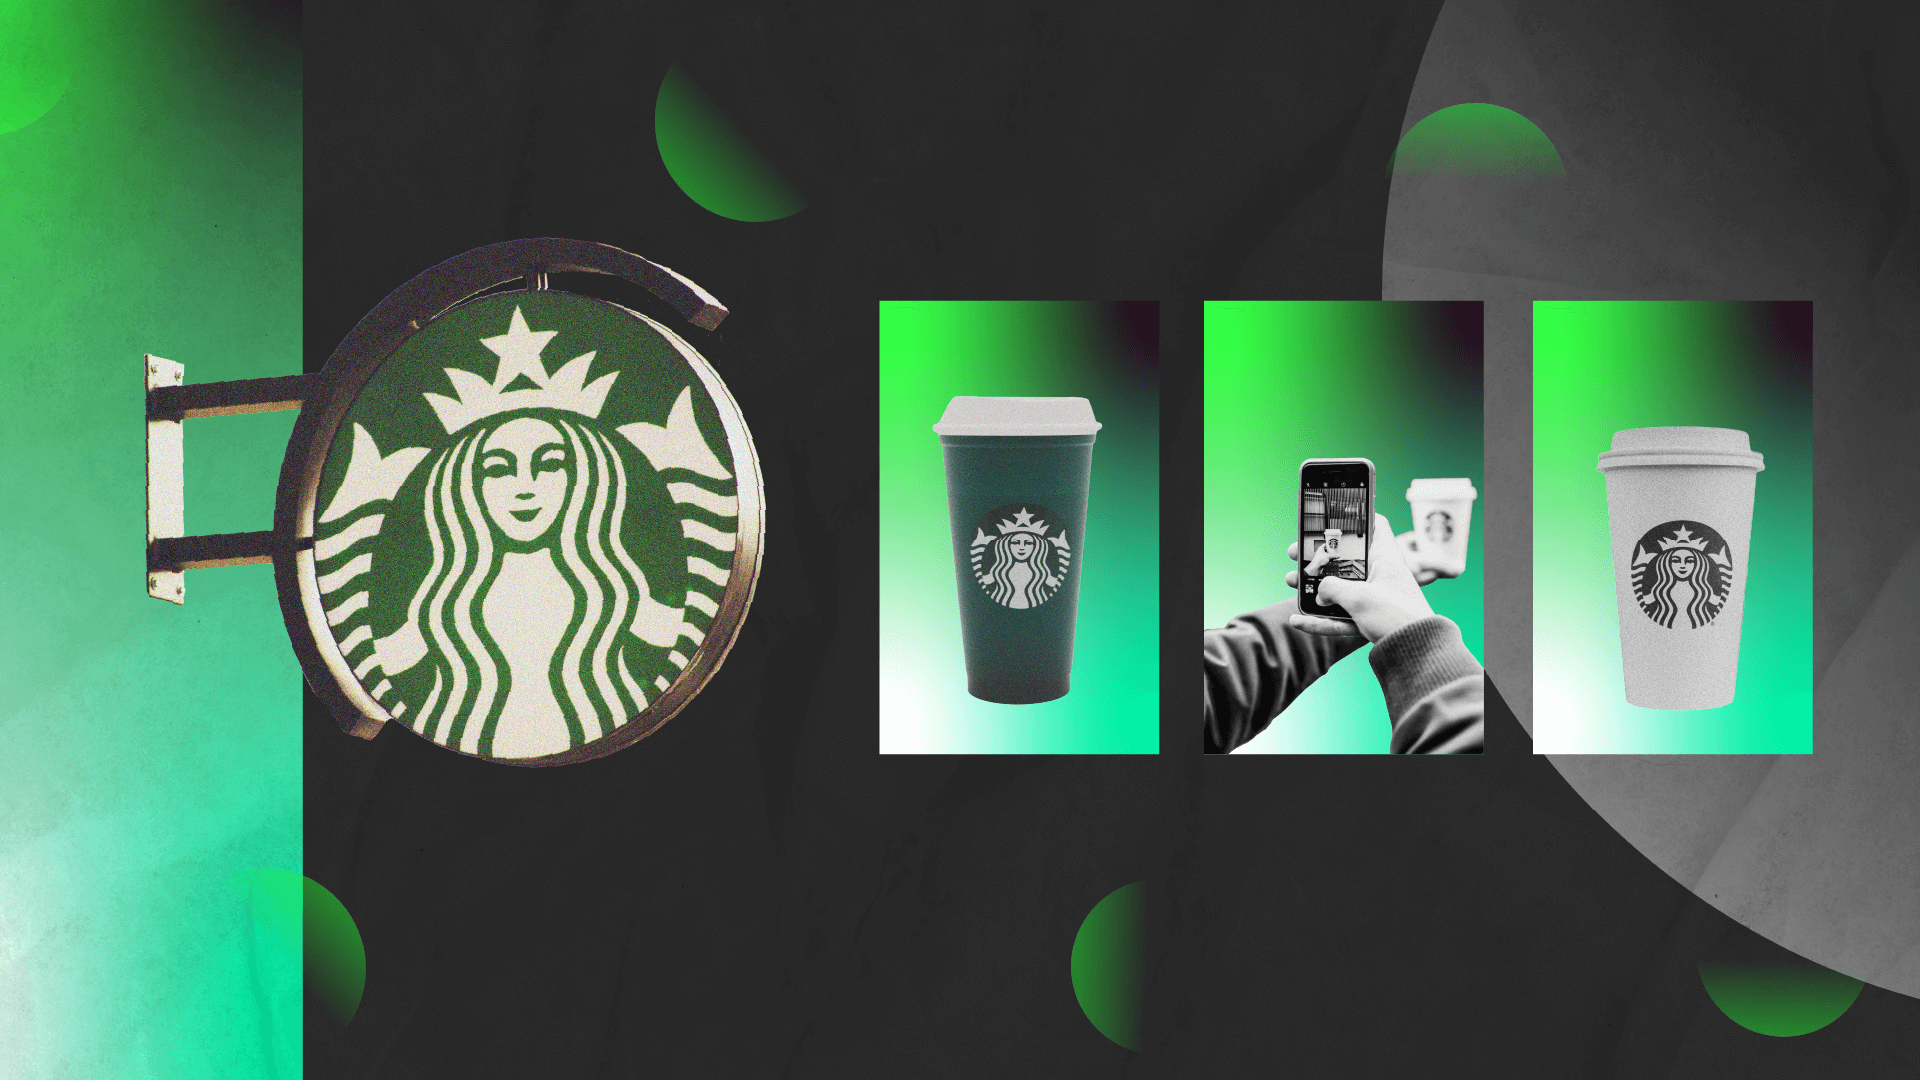 https://www.mjvinnovation.com/wp-content/uploads/2020/09/starbucks-third-place-cx-strategy-article-cover-image-mjv-innovation-2022.png